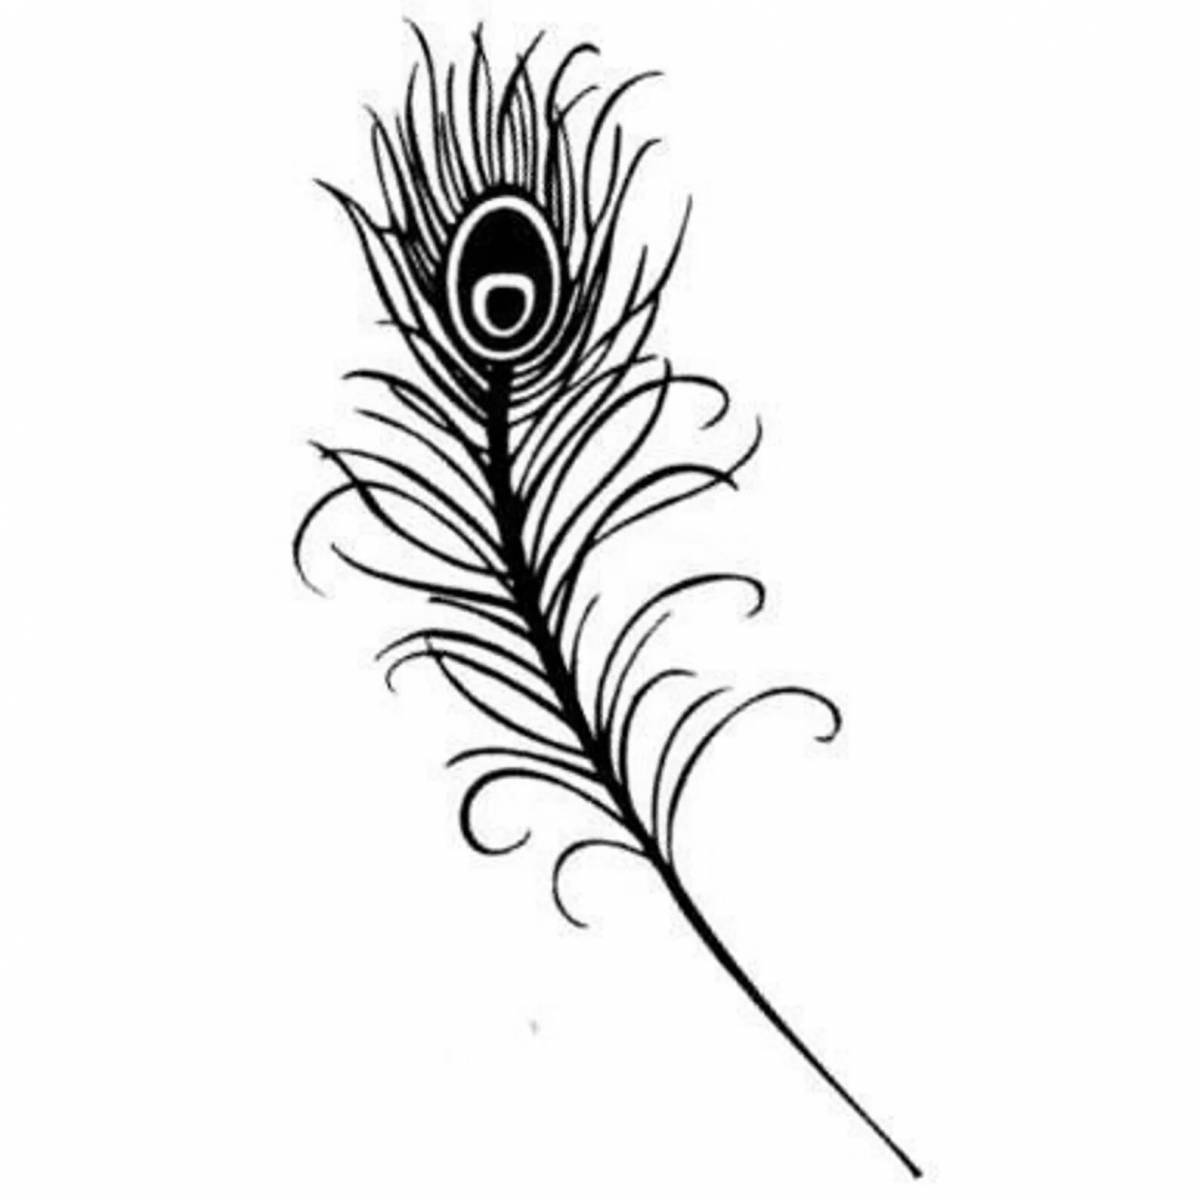 Awesome peacock feather coloring pages for kids